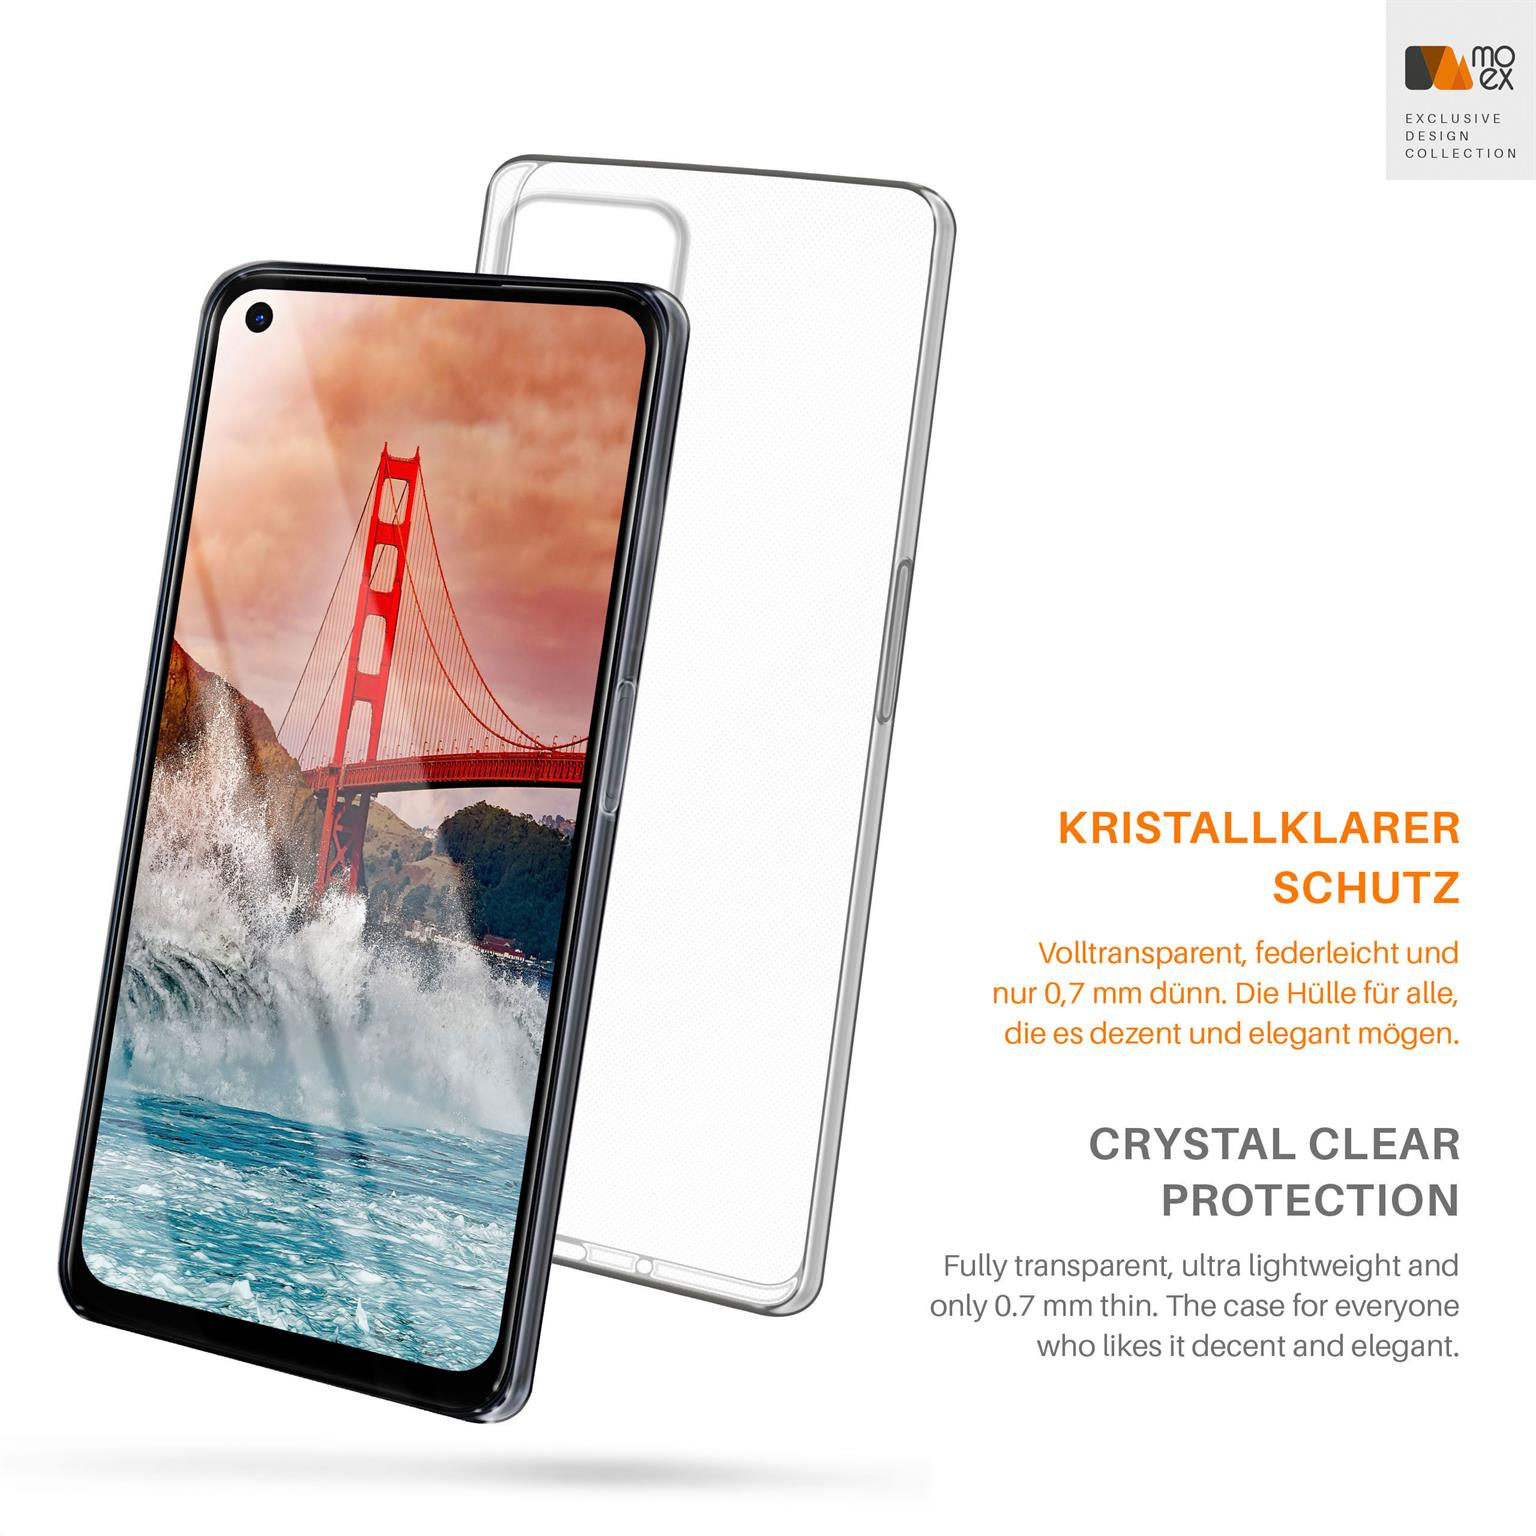 5G, Case, MOEX Aero A73 Oppo, Crystal-Clear Backcover,